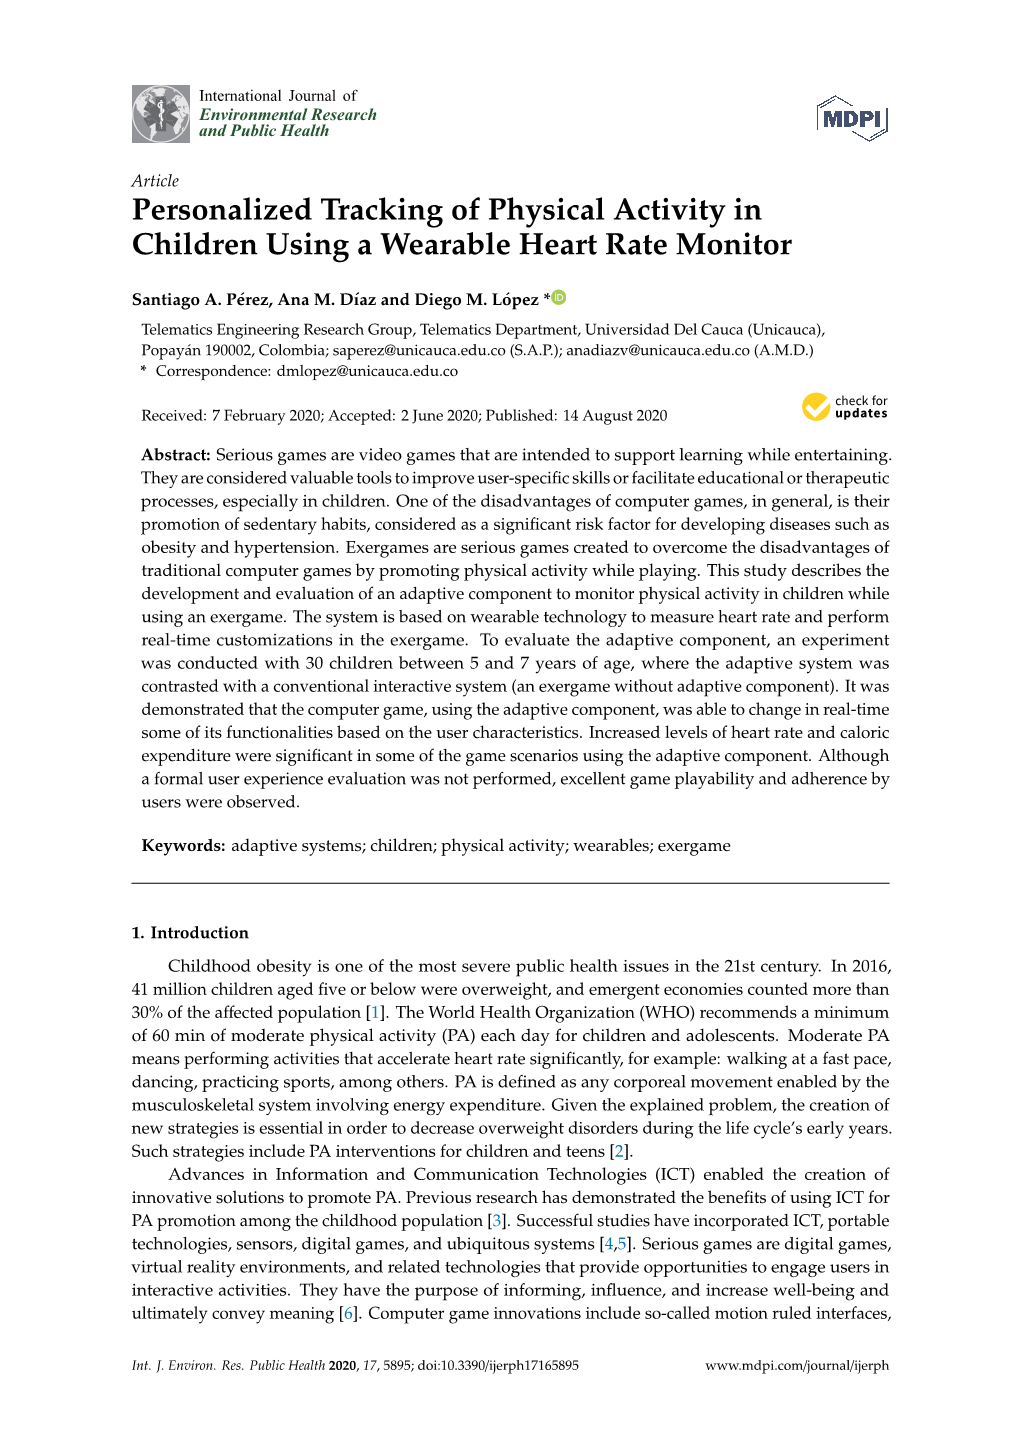 Personalized Tracking of Physical Activity in Children Using a Wearable Heart Rate Monitor